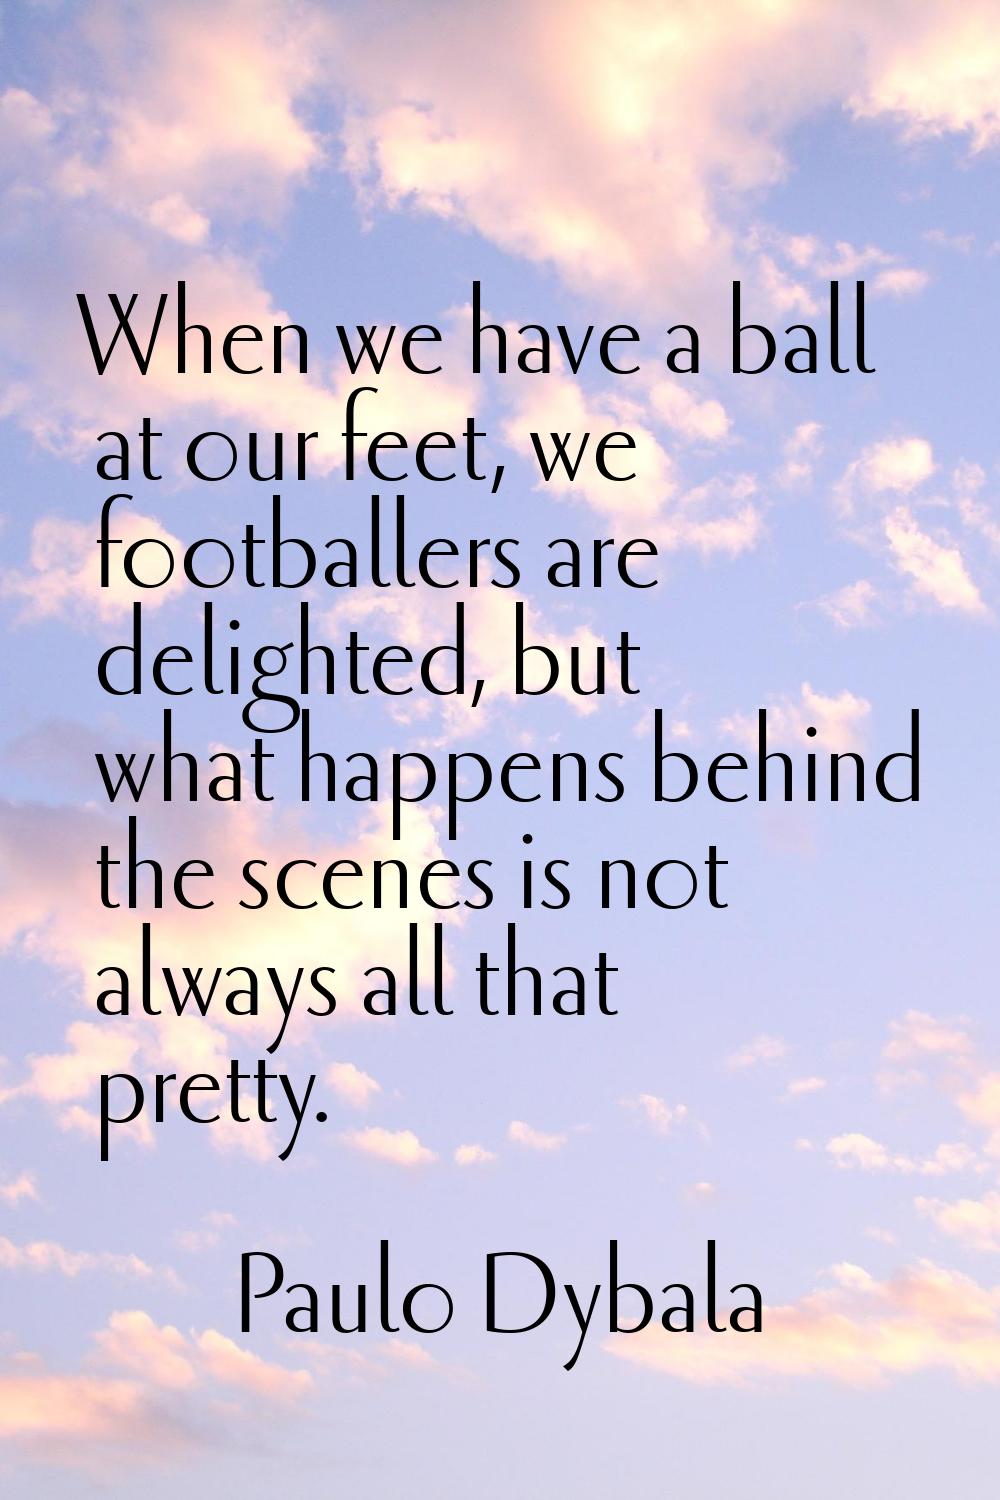 When we have a ball at our feet, we footballers are delighted, but what happens behind the scenes i